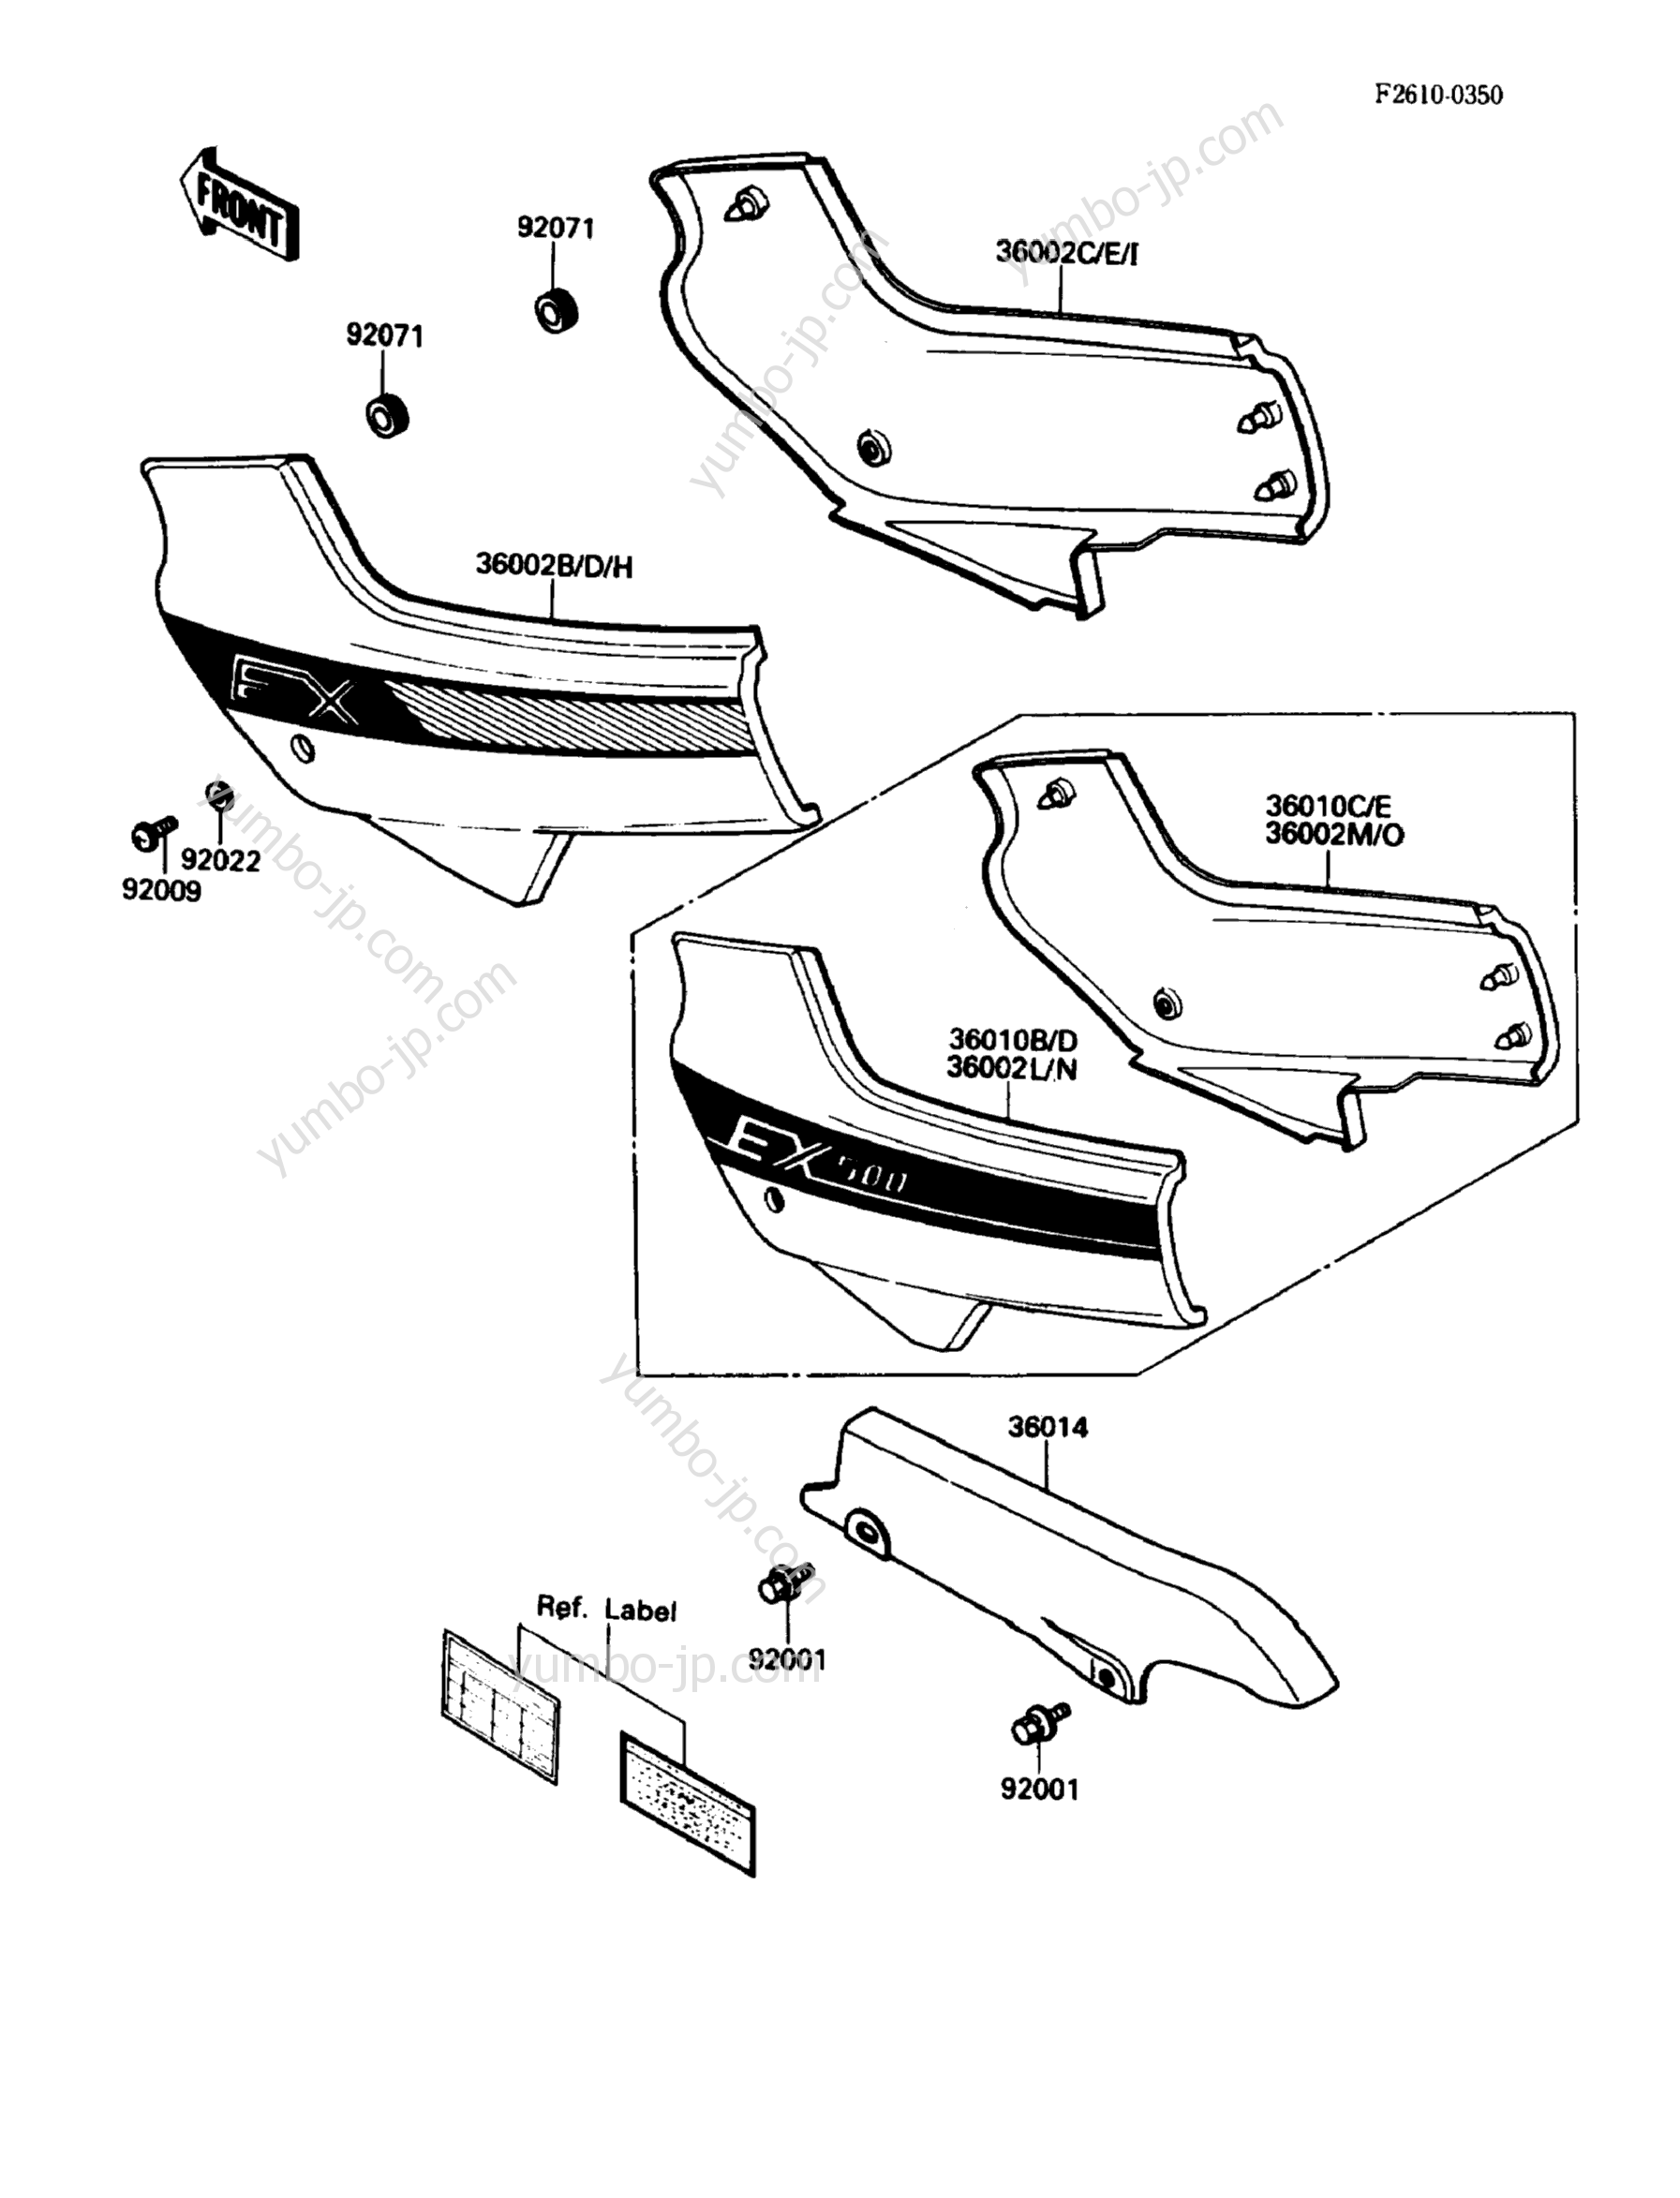 Side Covers/Chain Cover for motorcycles KAWASAKI EX500 (EX500-A3) 1989 year